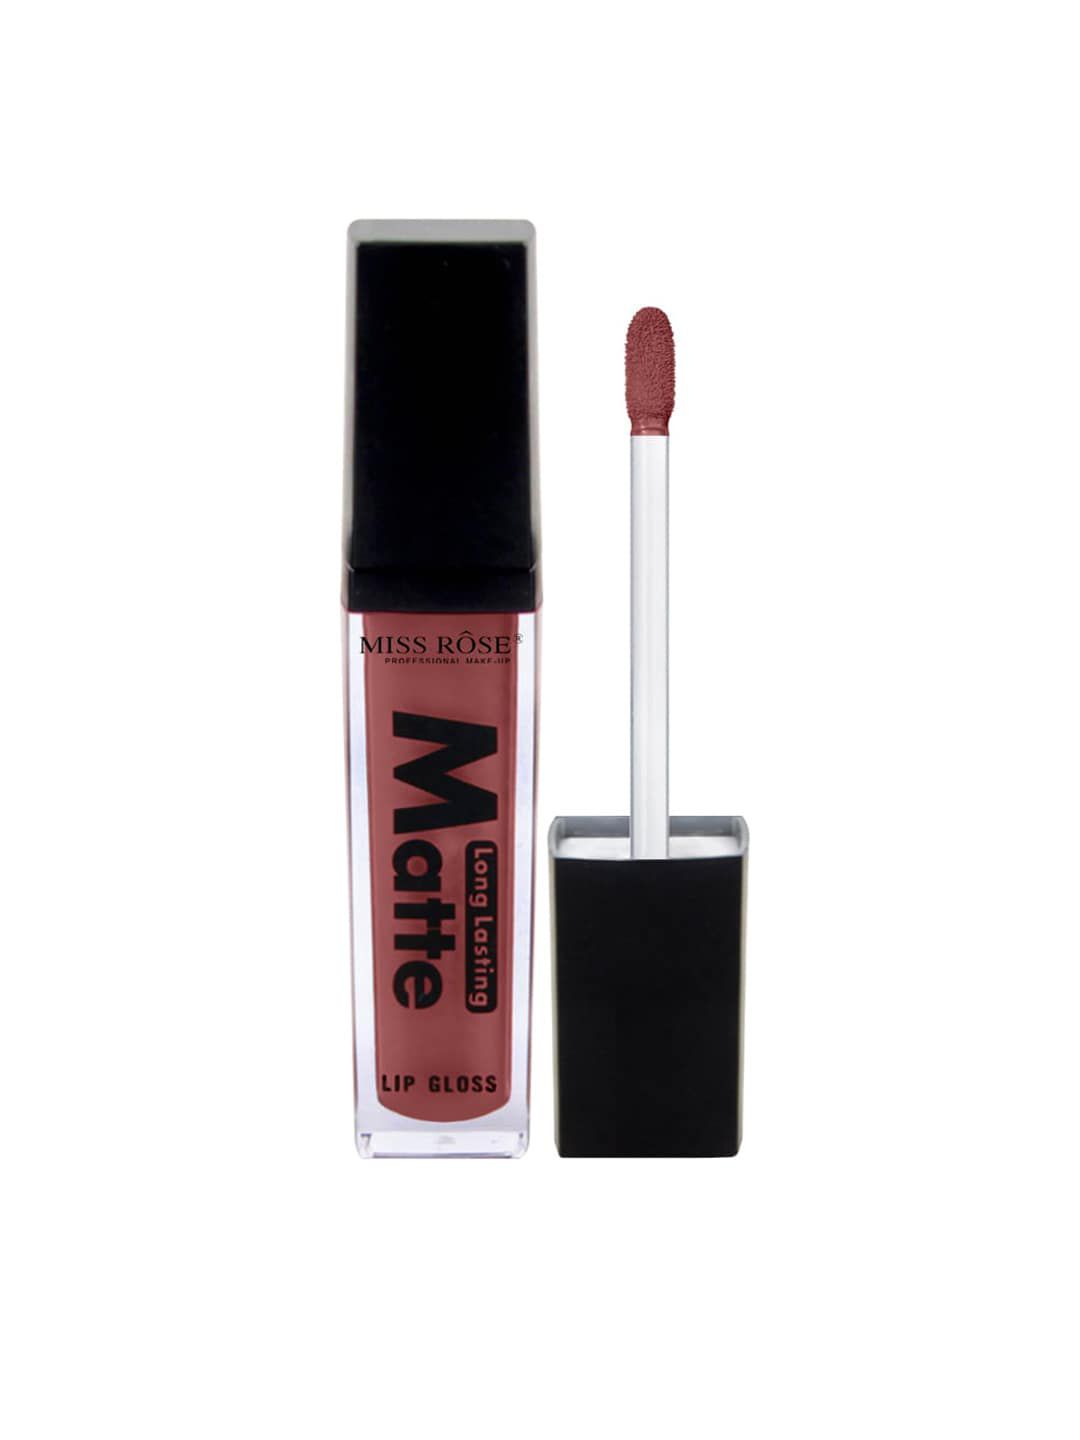 MISS ROSE Matte Long Lasting LipGloss 7701-002M 24 20 gm Price in India